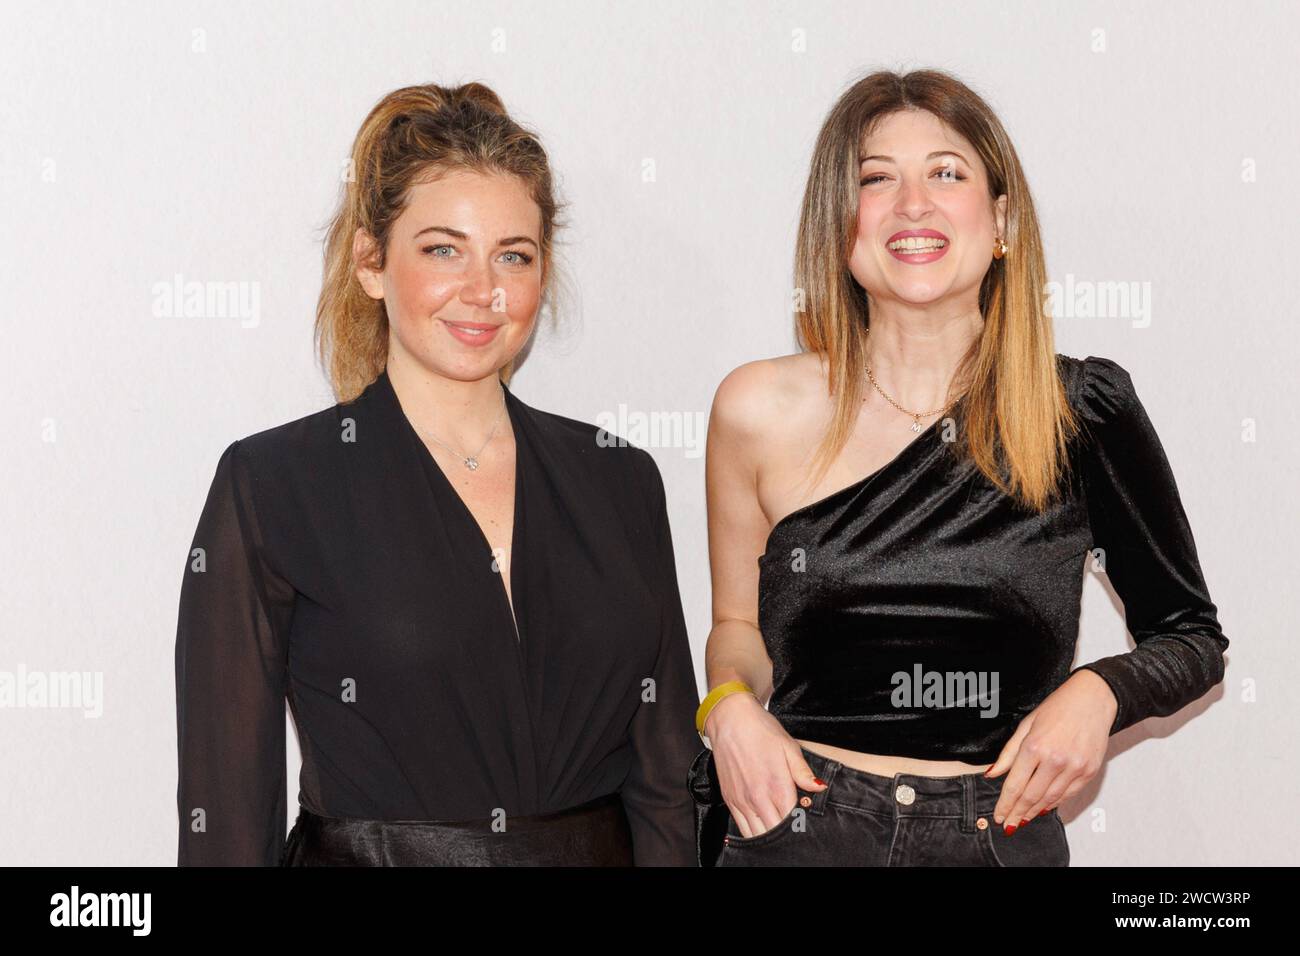 News - Photocall Movie Povere Creature Alice Caccamo and Marta Filippi during the photocall of the movie Povere Creature, 16 january 2024 at Cinema Barberini, Rome, Italy Italy Copyright: xcxEmanuelaxVertolli/SportReporterx/xLiveMediax LPN 1199516 Stock Photo